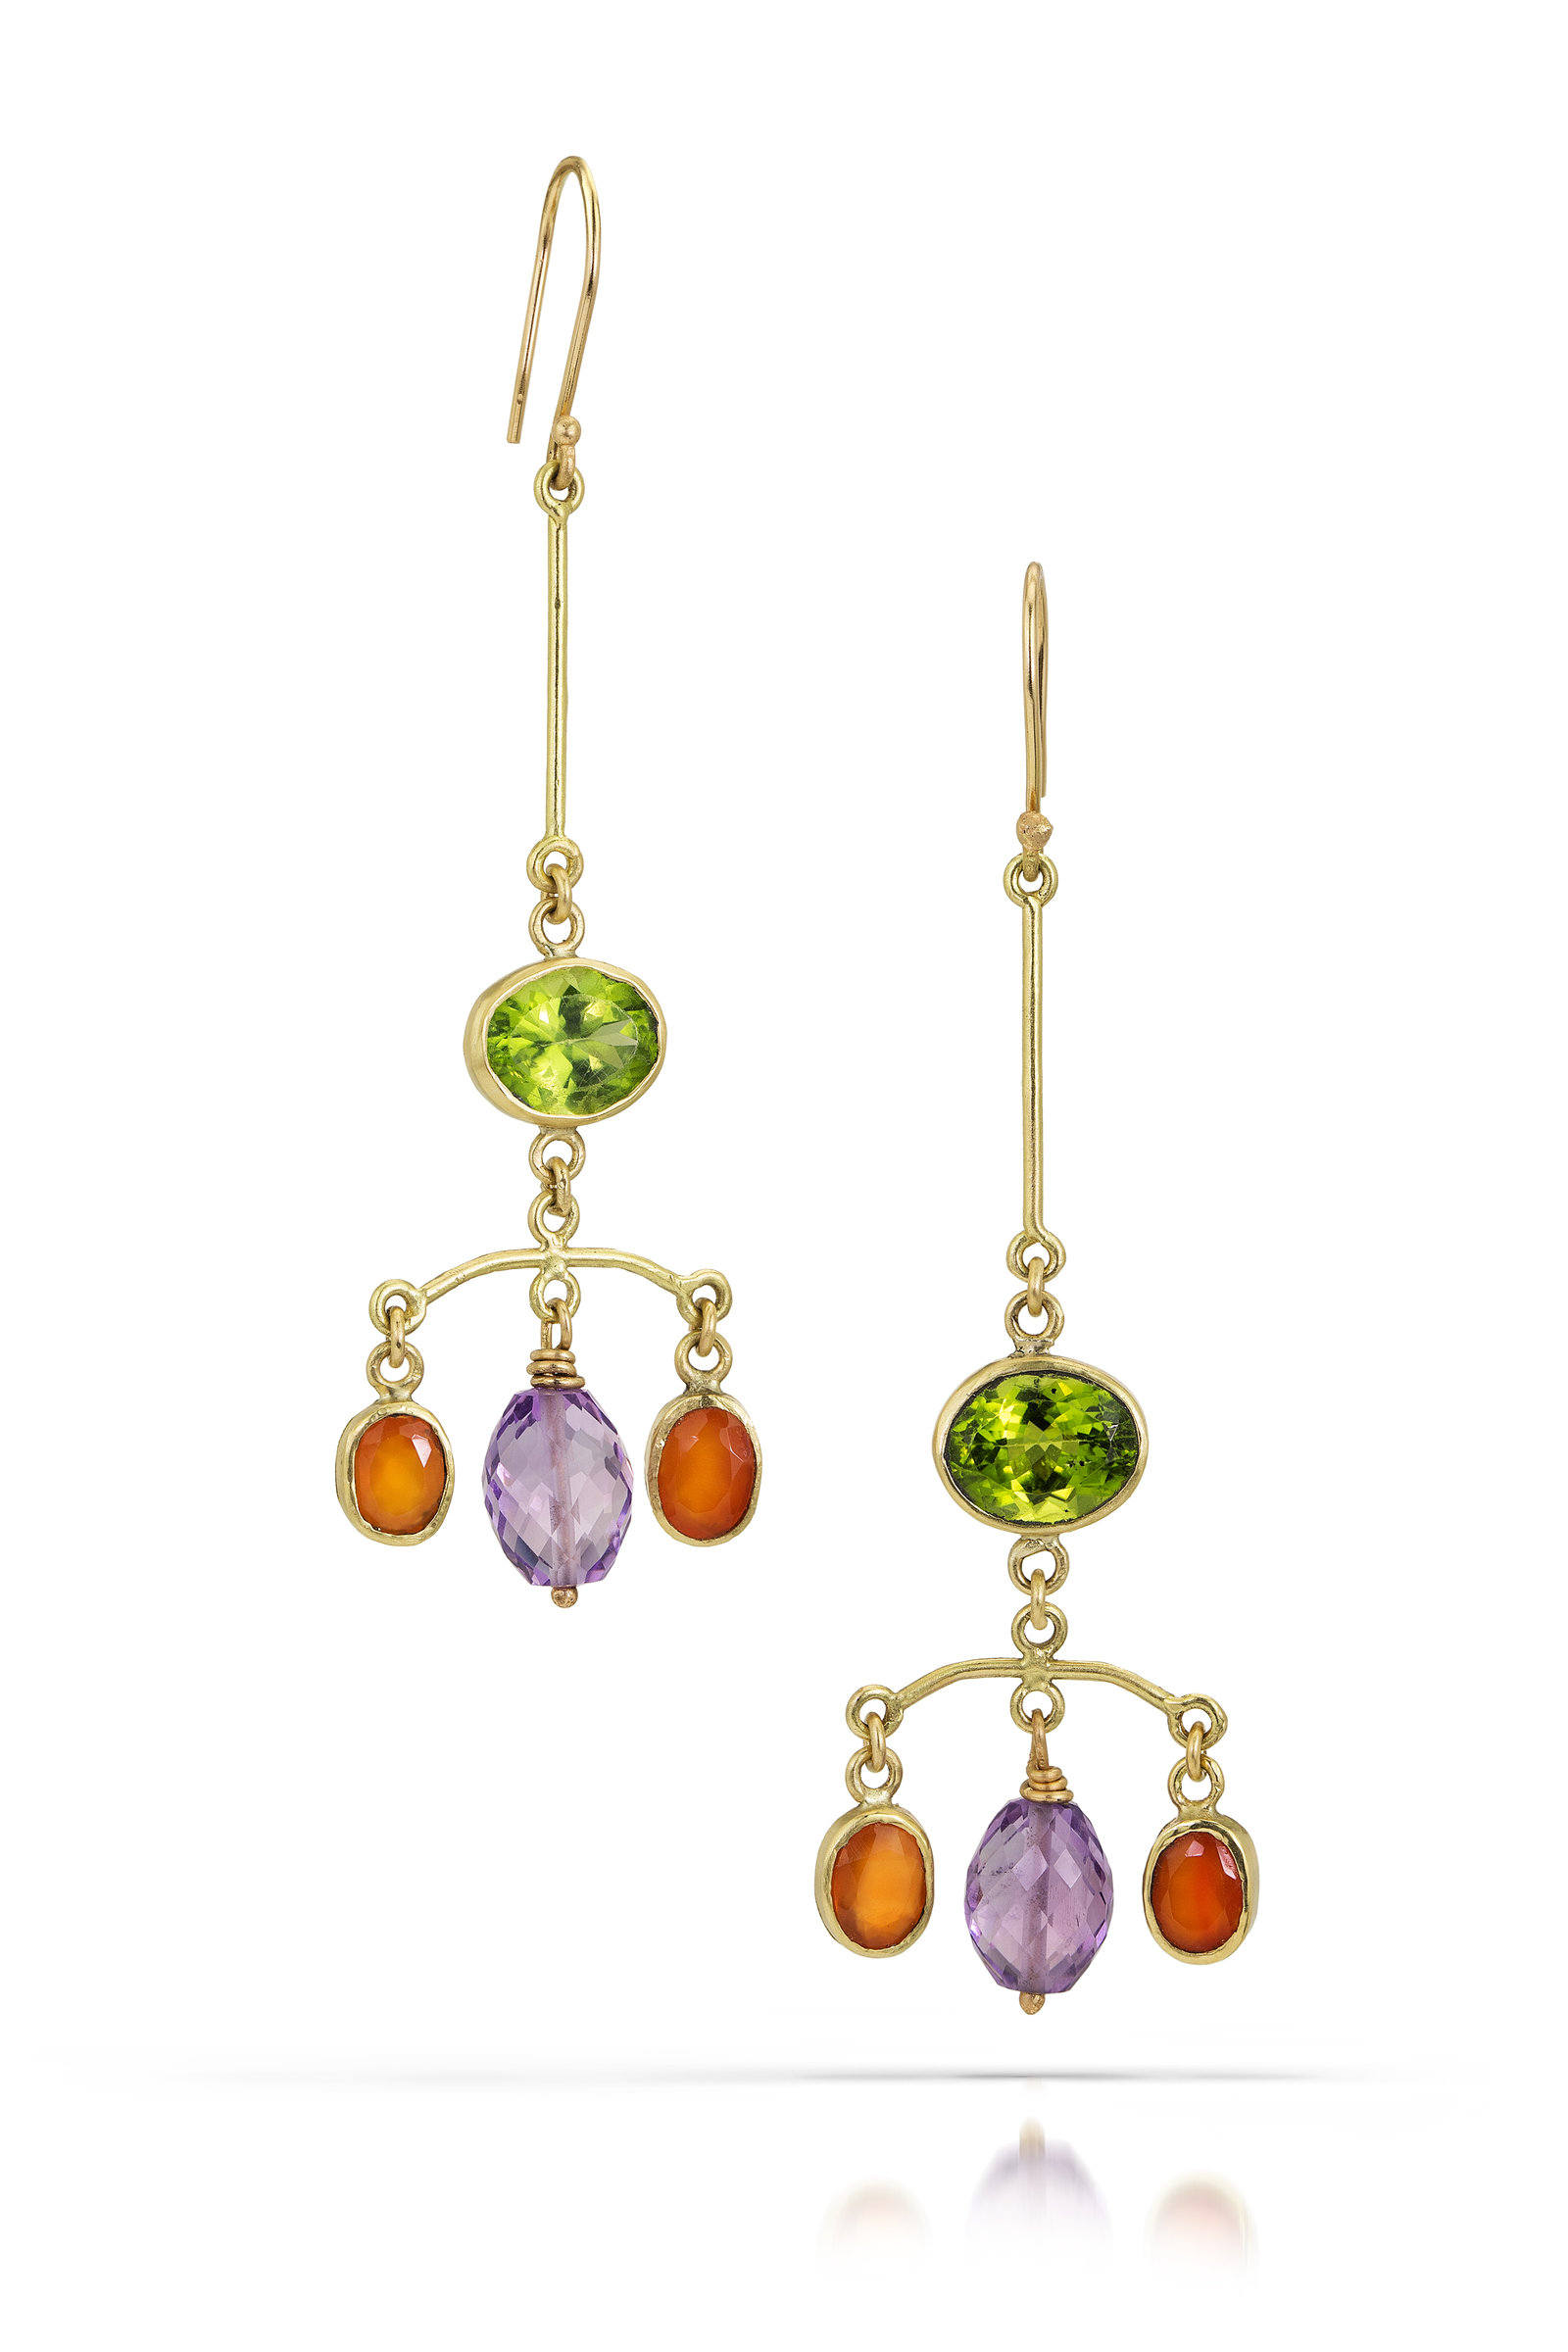 Details about   14K Solid Rose Gold Chandelier Earrings with Natural Peridots 